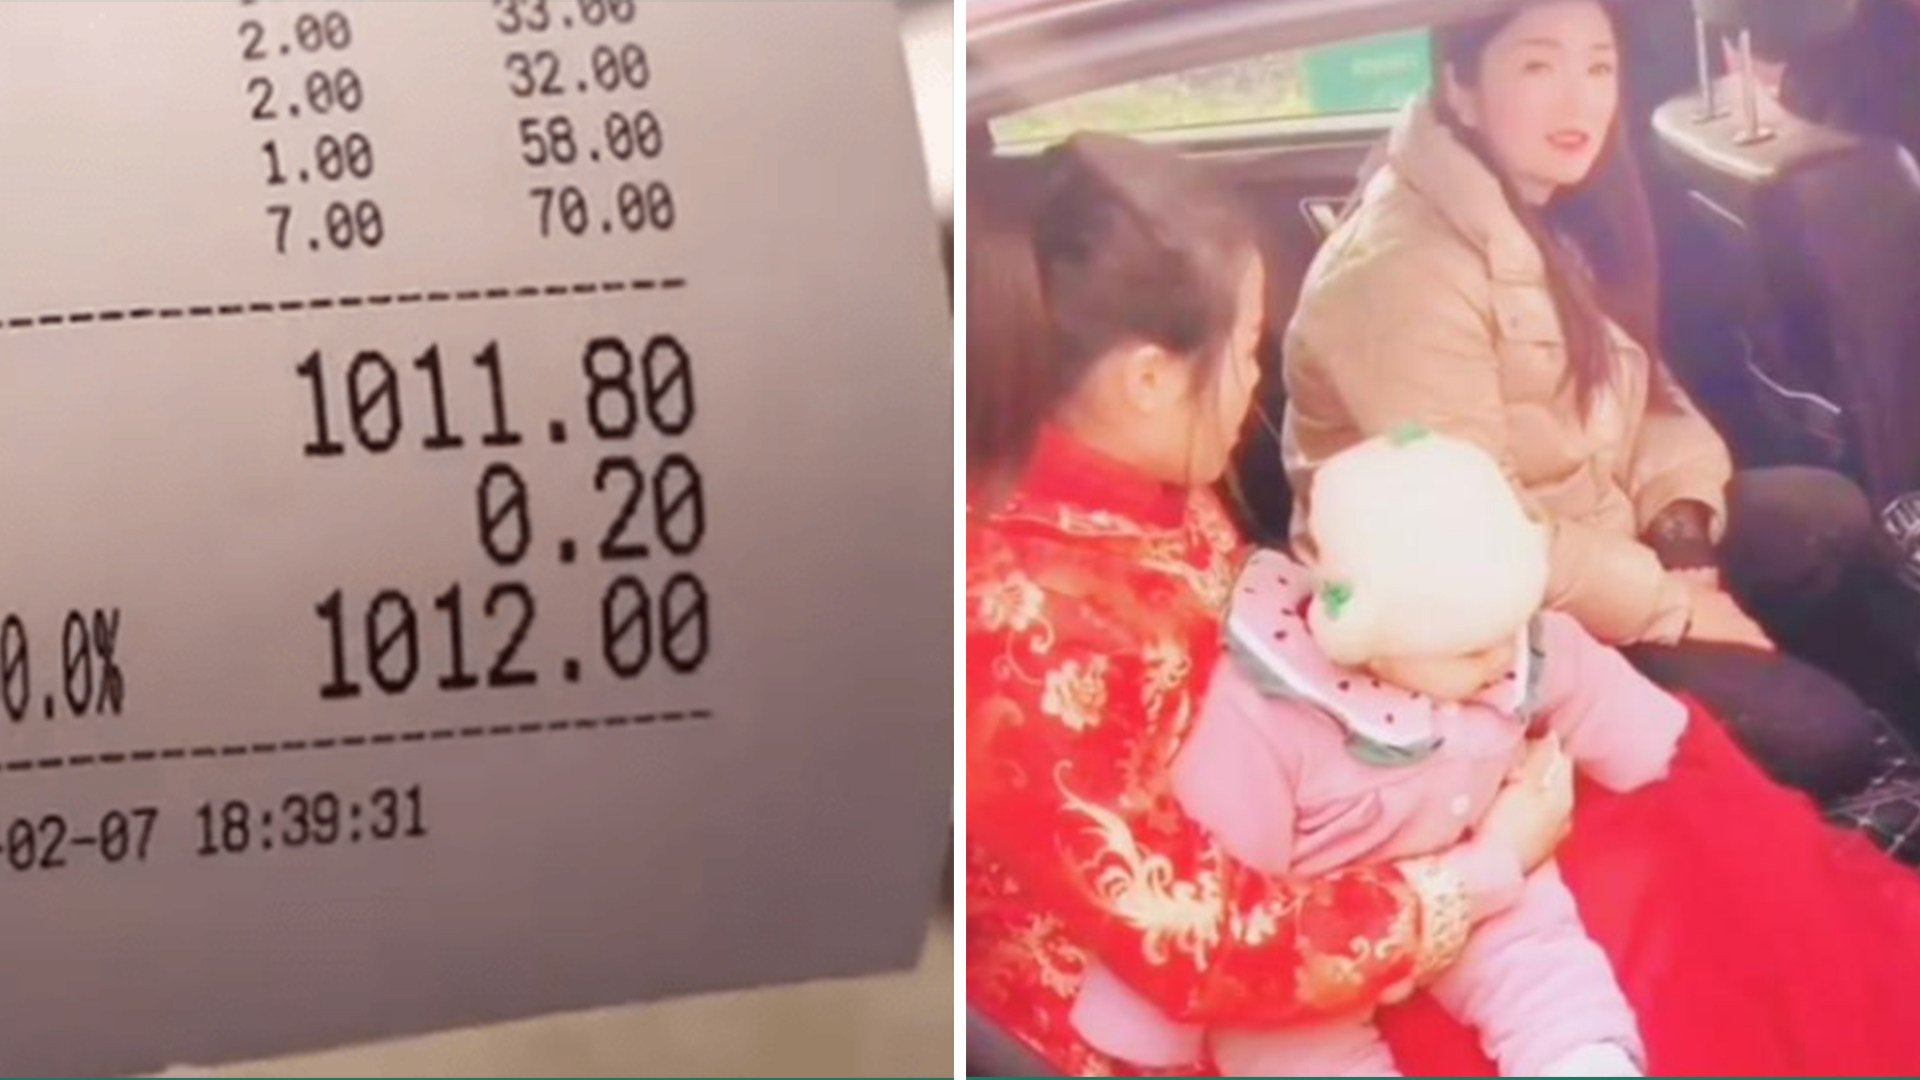 A 0.2 yuan overcharge led to an online rant, and a bride’s family refused to get out of a car unless the groom paid an expensive ‘alighting fee’. Photo: Handout